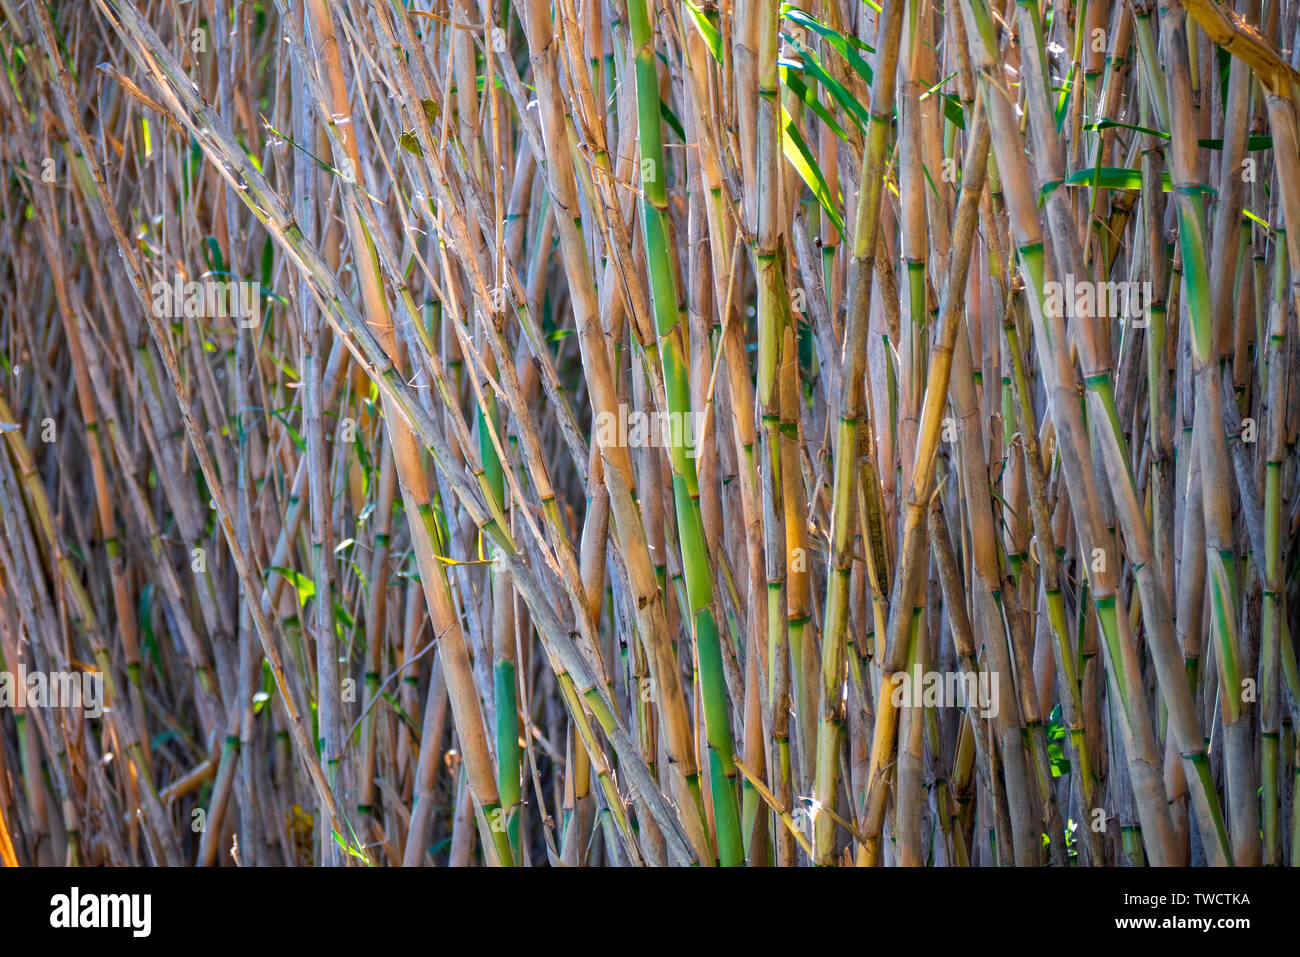 Natural reeds in a natural reserve Stock Photo